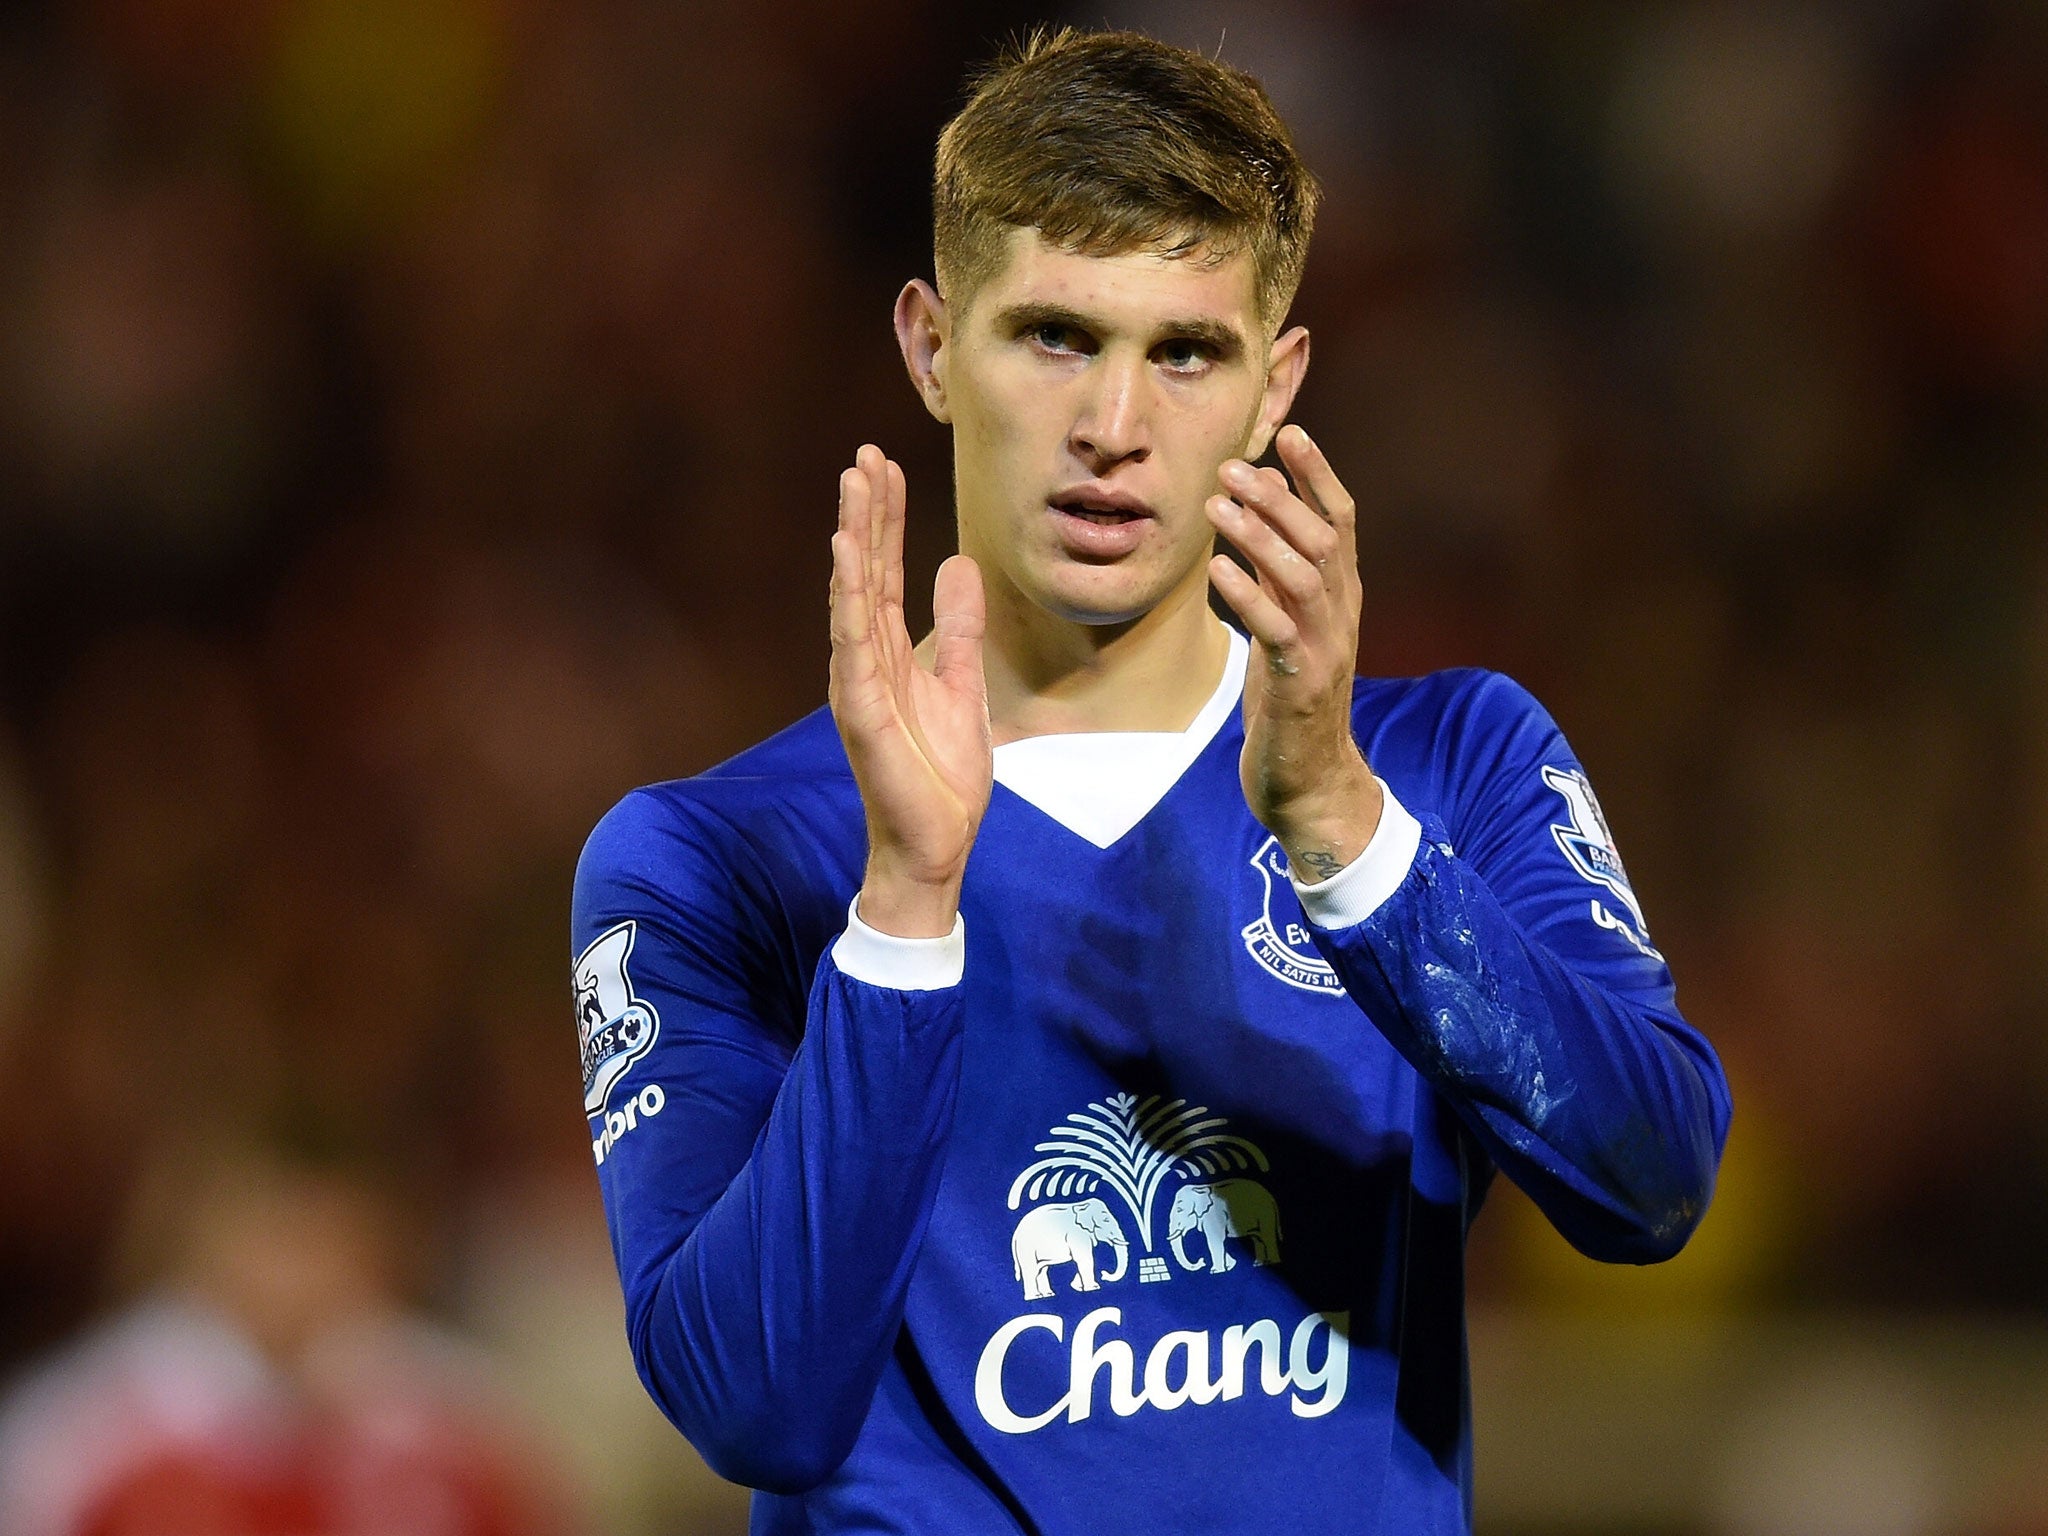 John Stones has been linked with Chelsea all summer